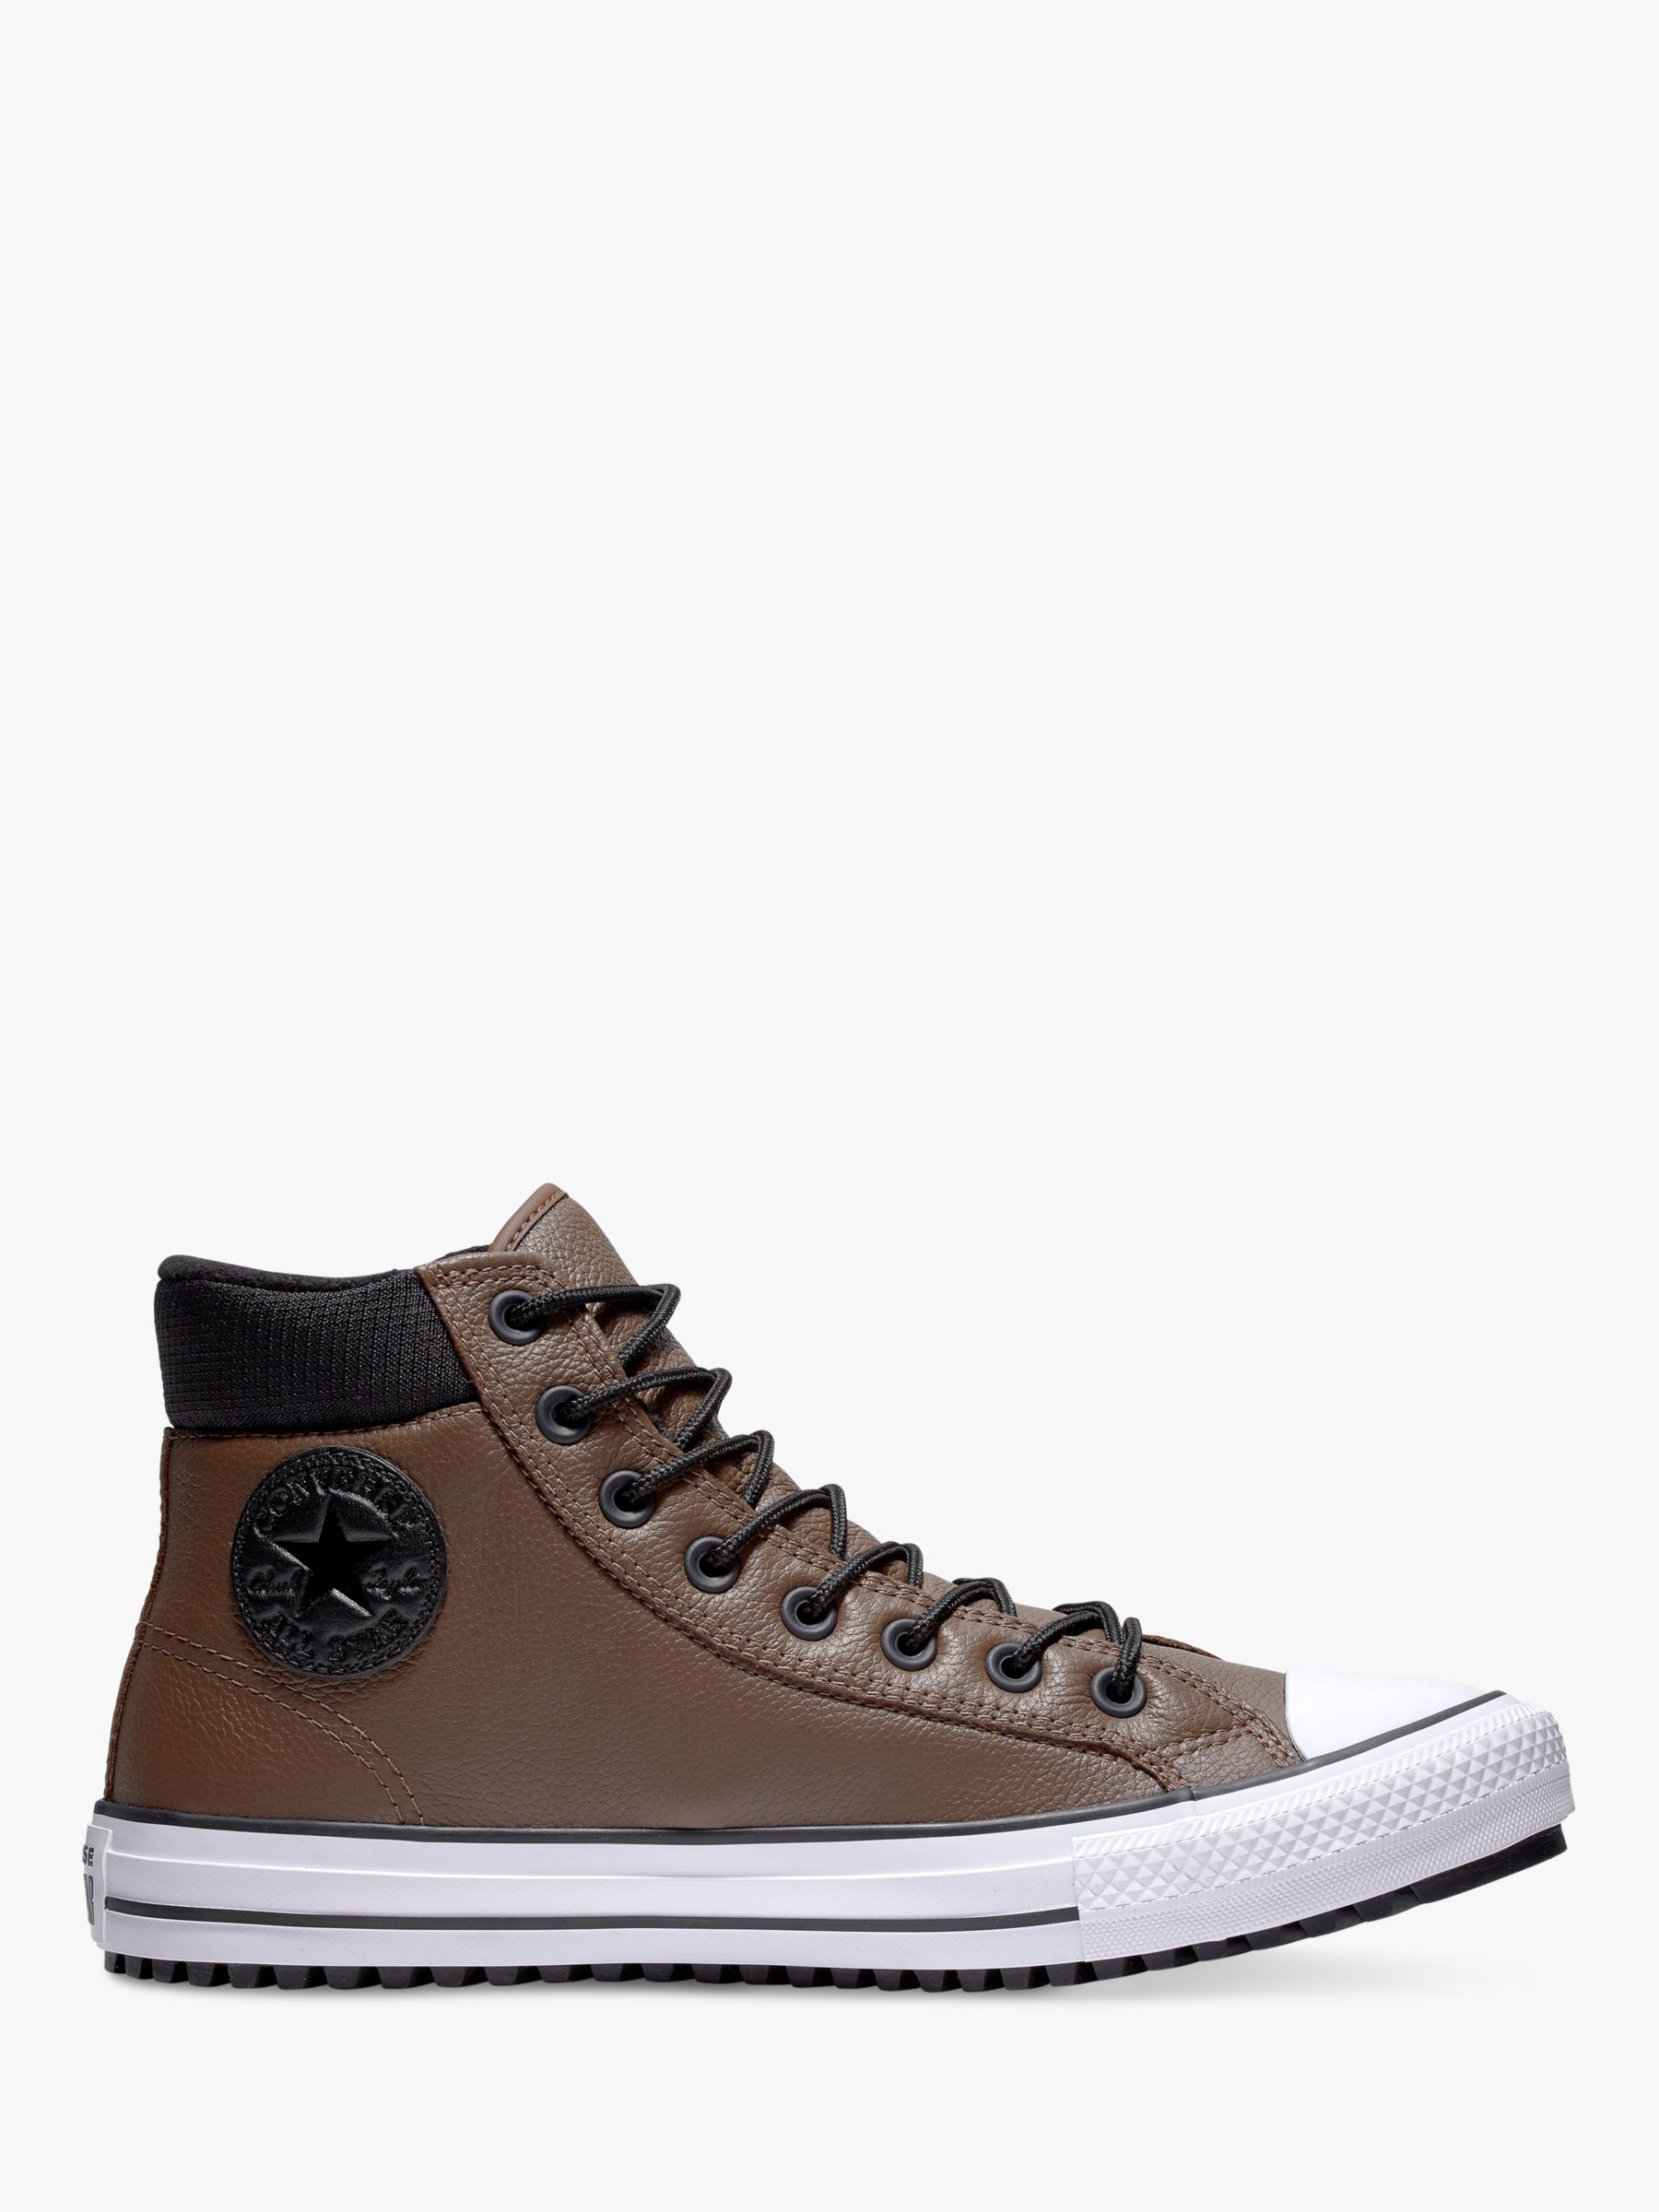 Converse Chuck Taylor All Star PC Leather High Top, Chocolate/Black/White  at John Lewis \u0026 Partners